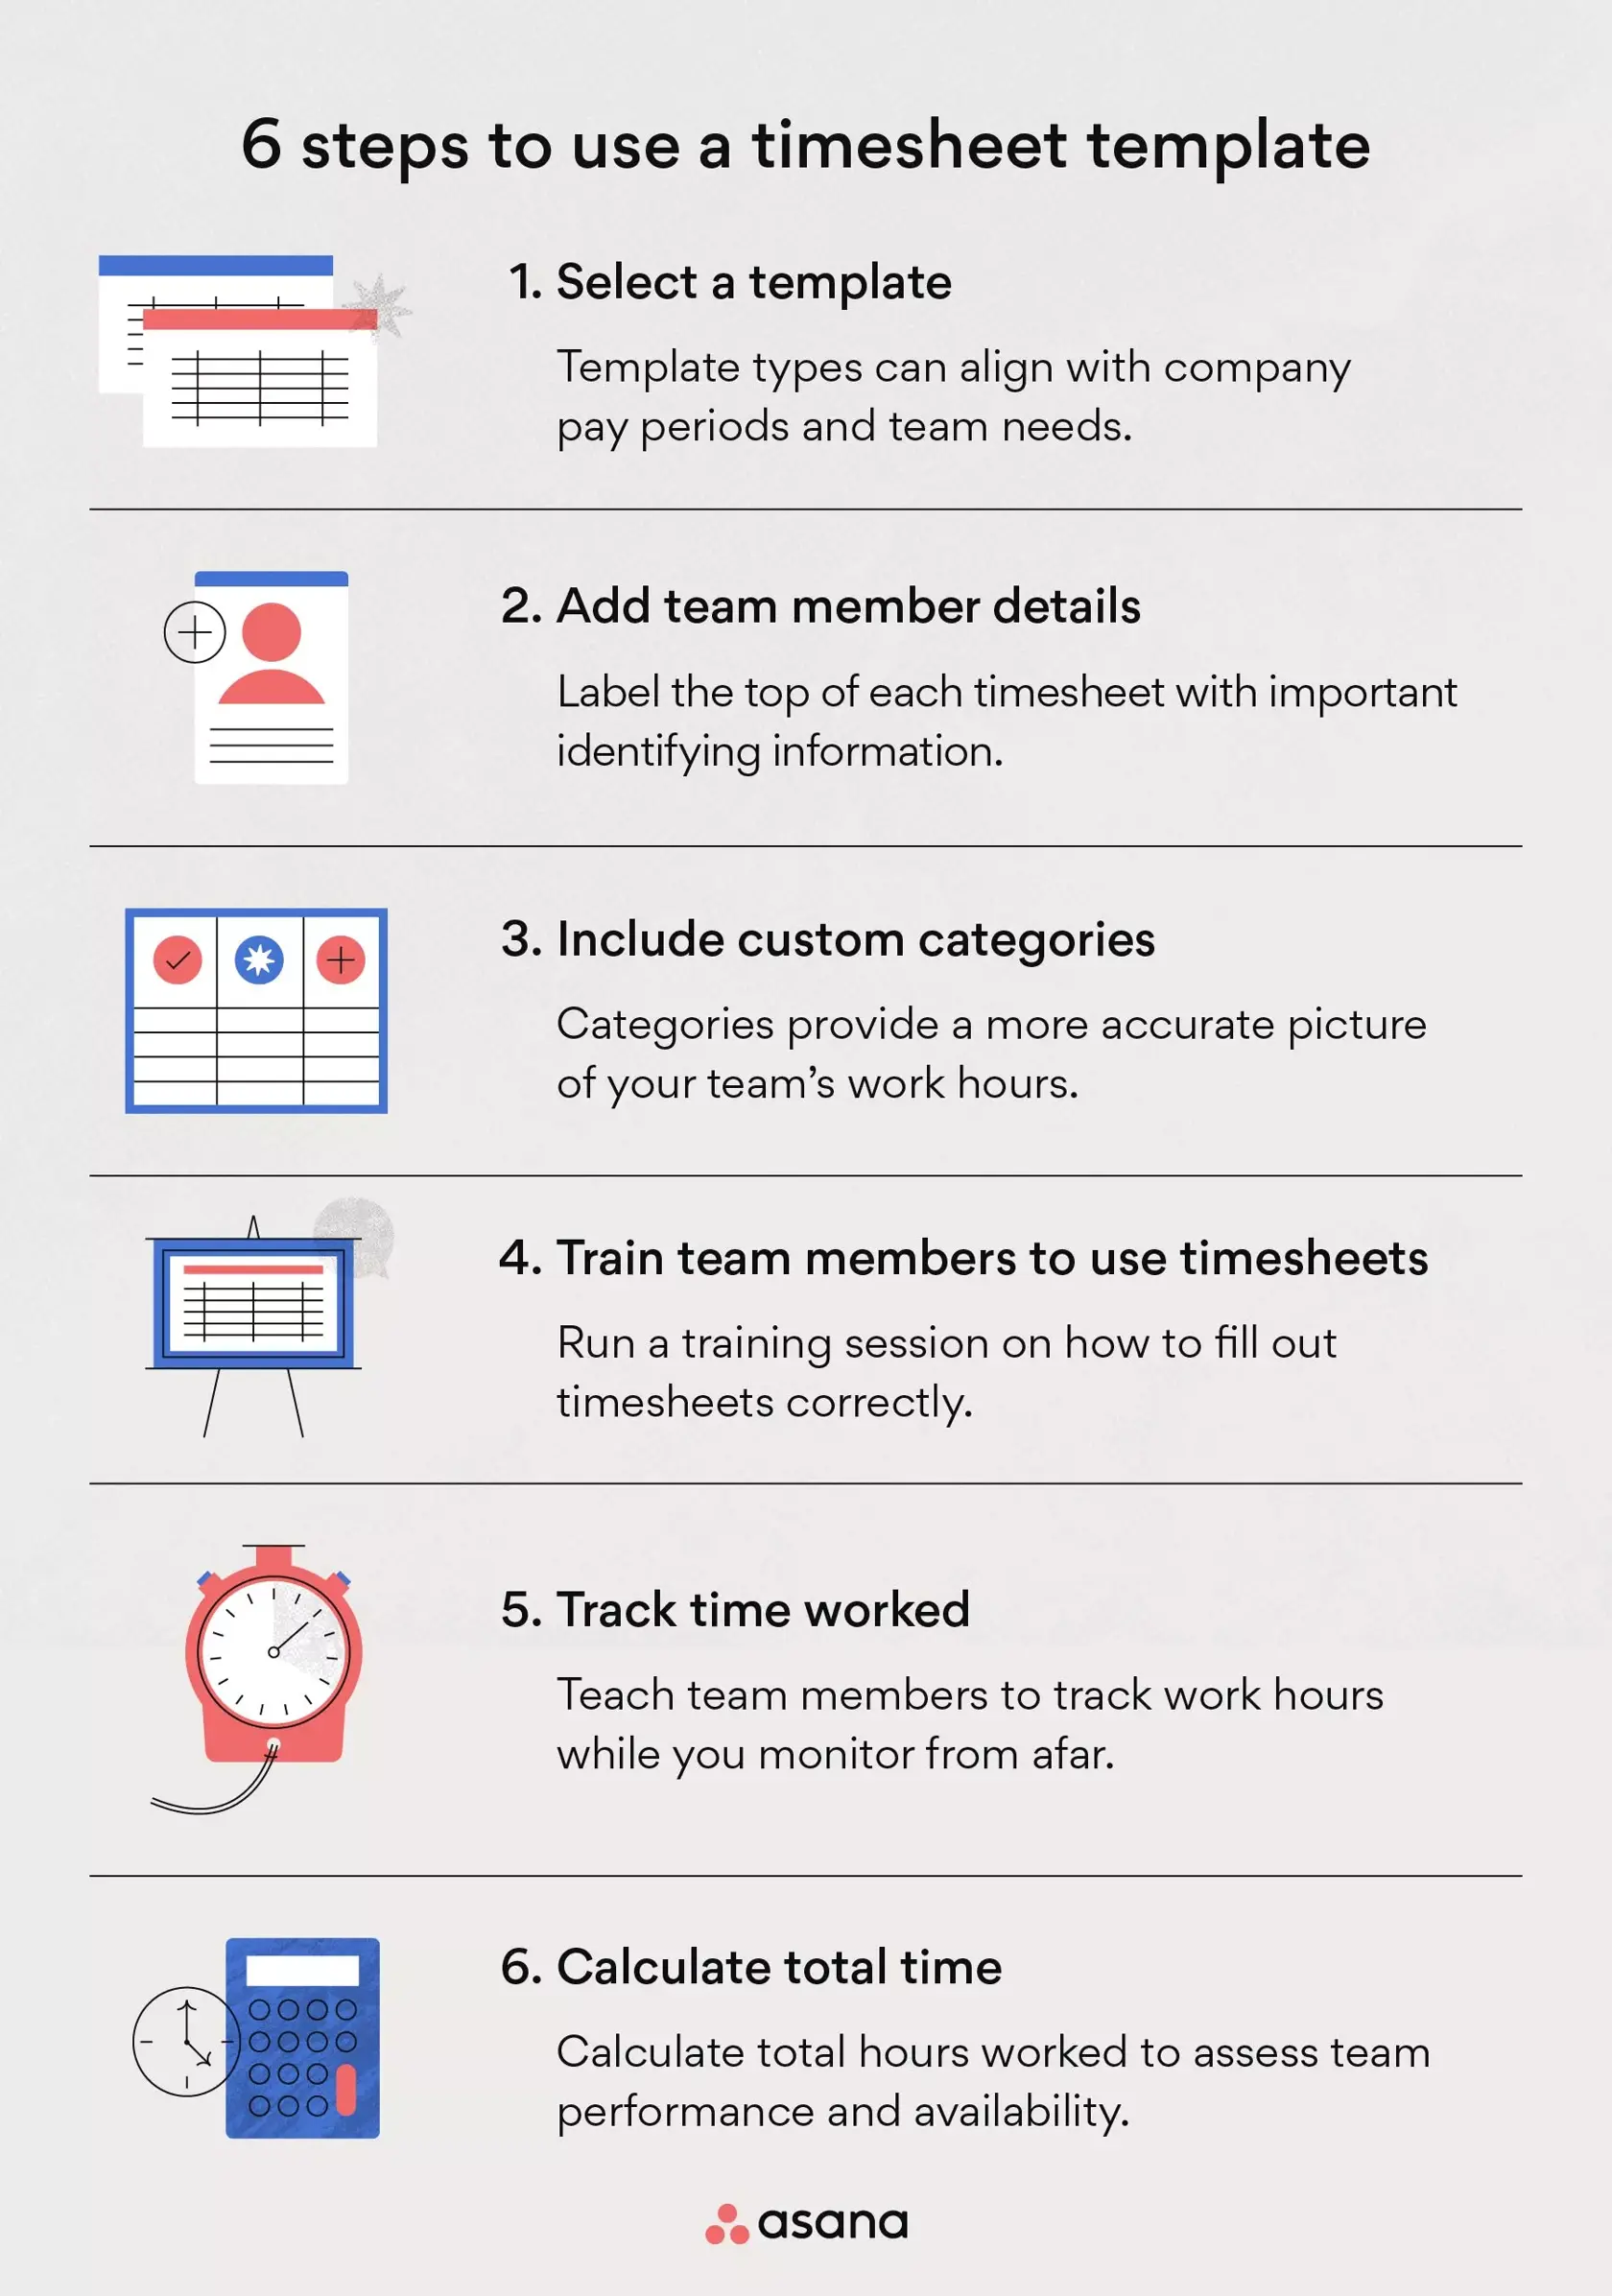 [inline illustration] 6 steps to use a timesheet template (infographic)